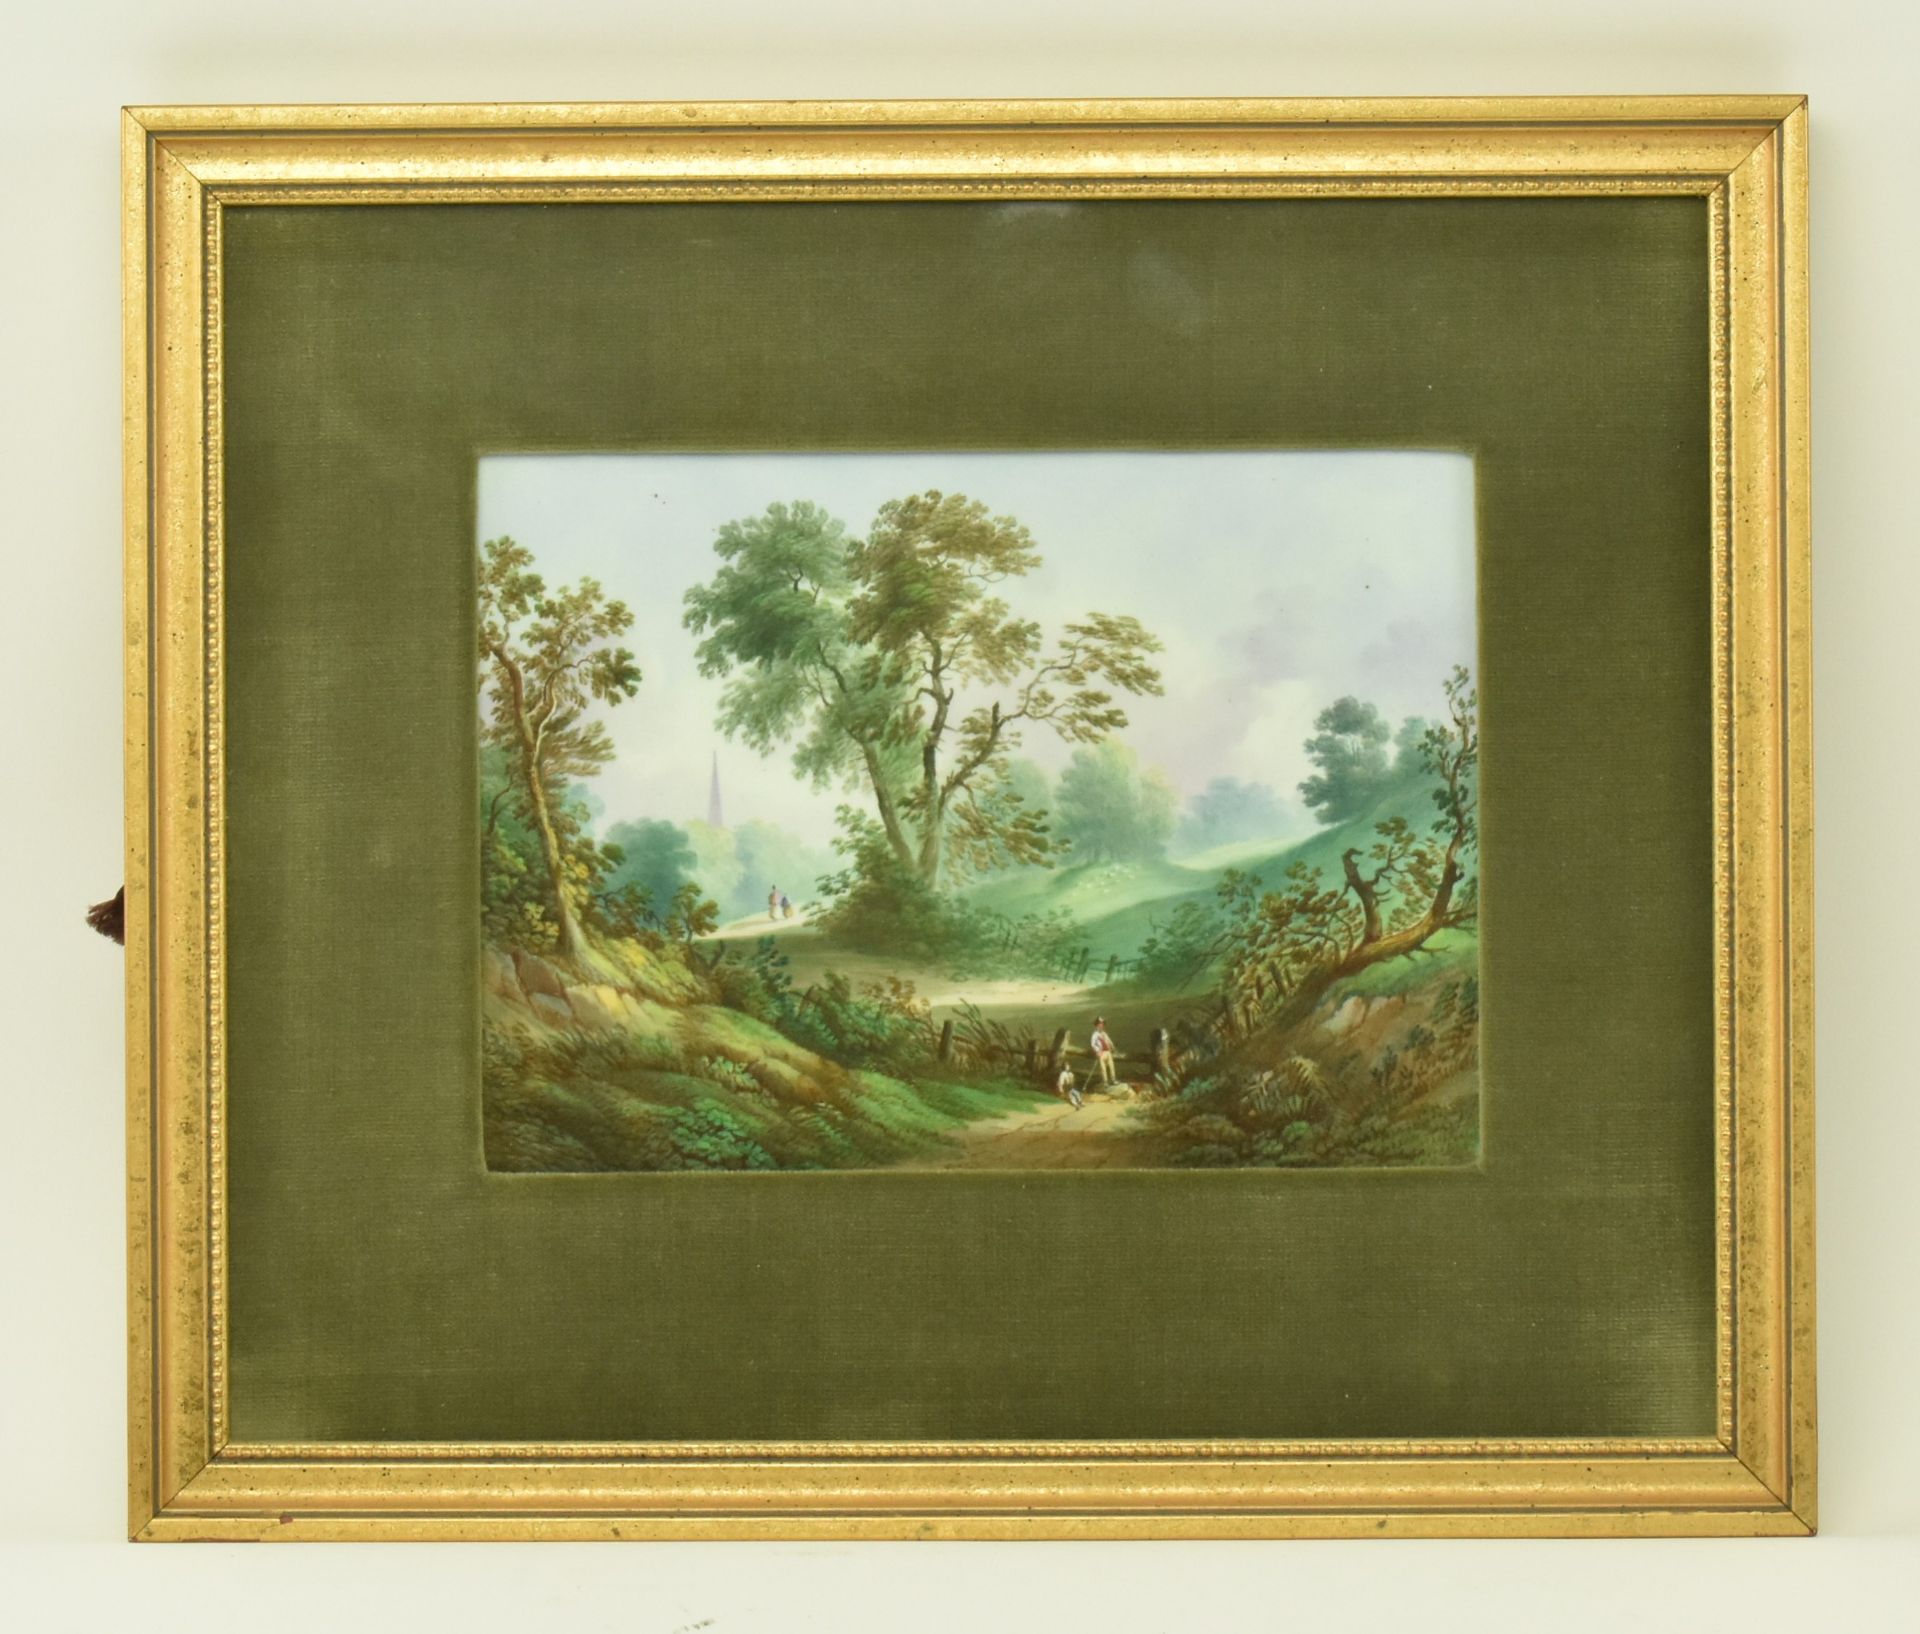 EARLY 19TH CENTURY FRAMED PORCELAIN PLAQUE OF FOREST SCENE - Image 2 of 4